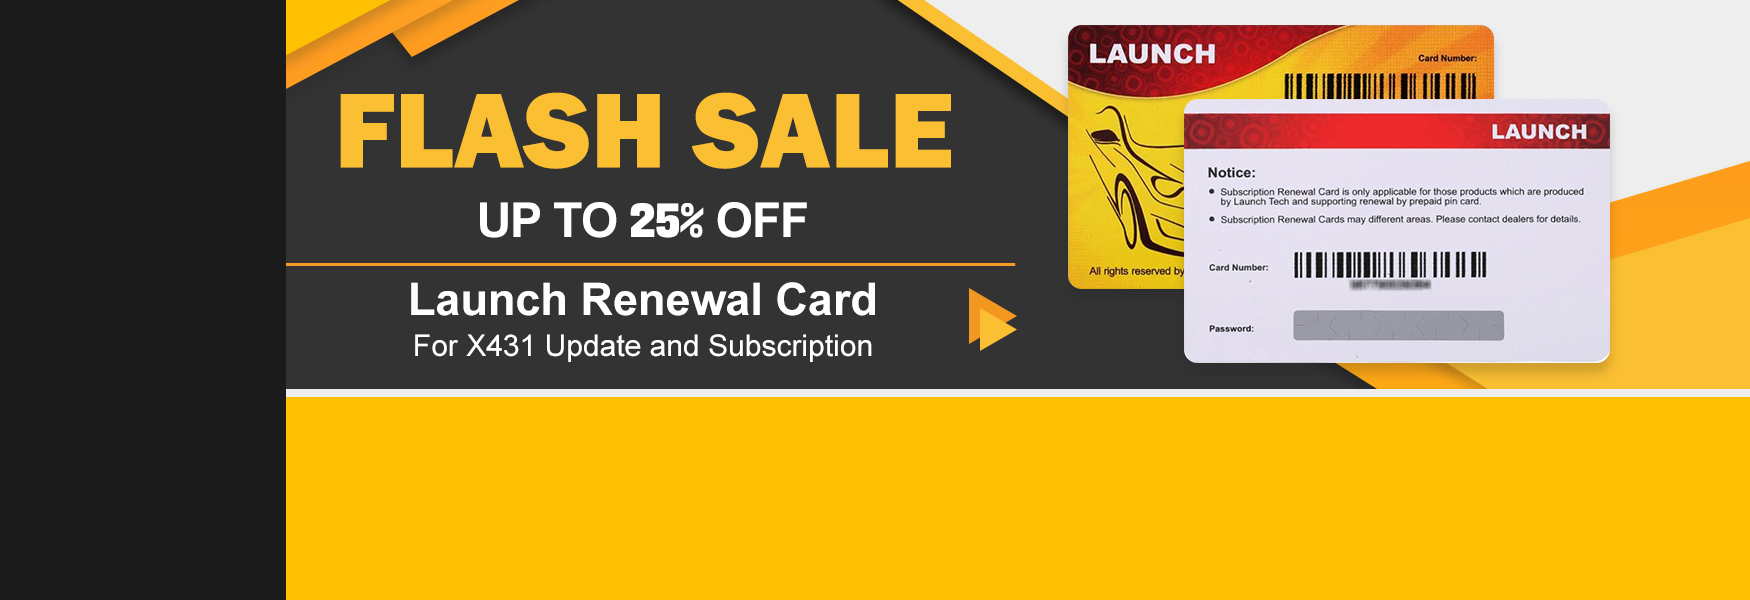 Launch Renewal Card On Sales